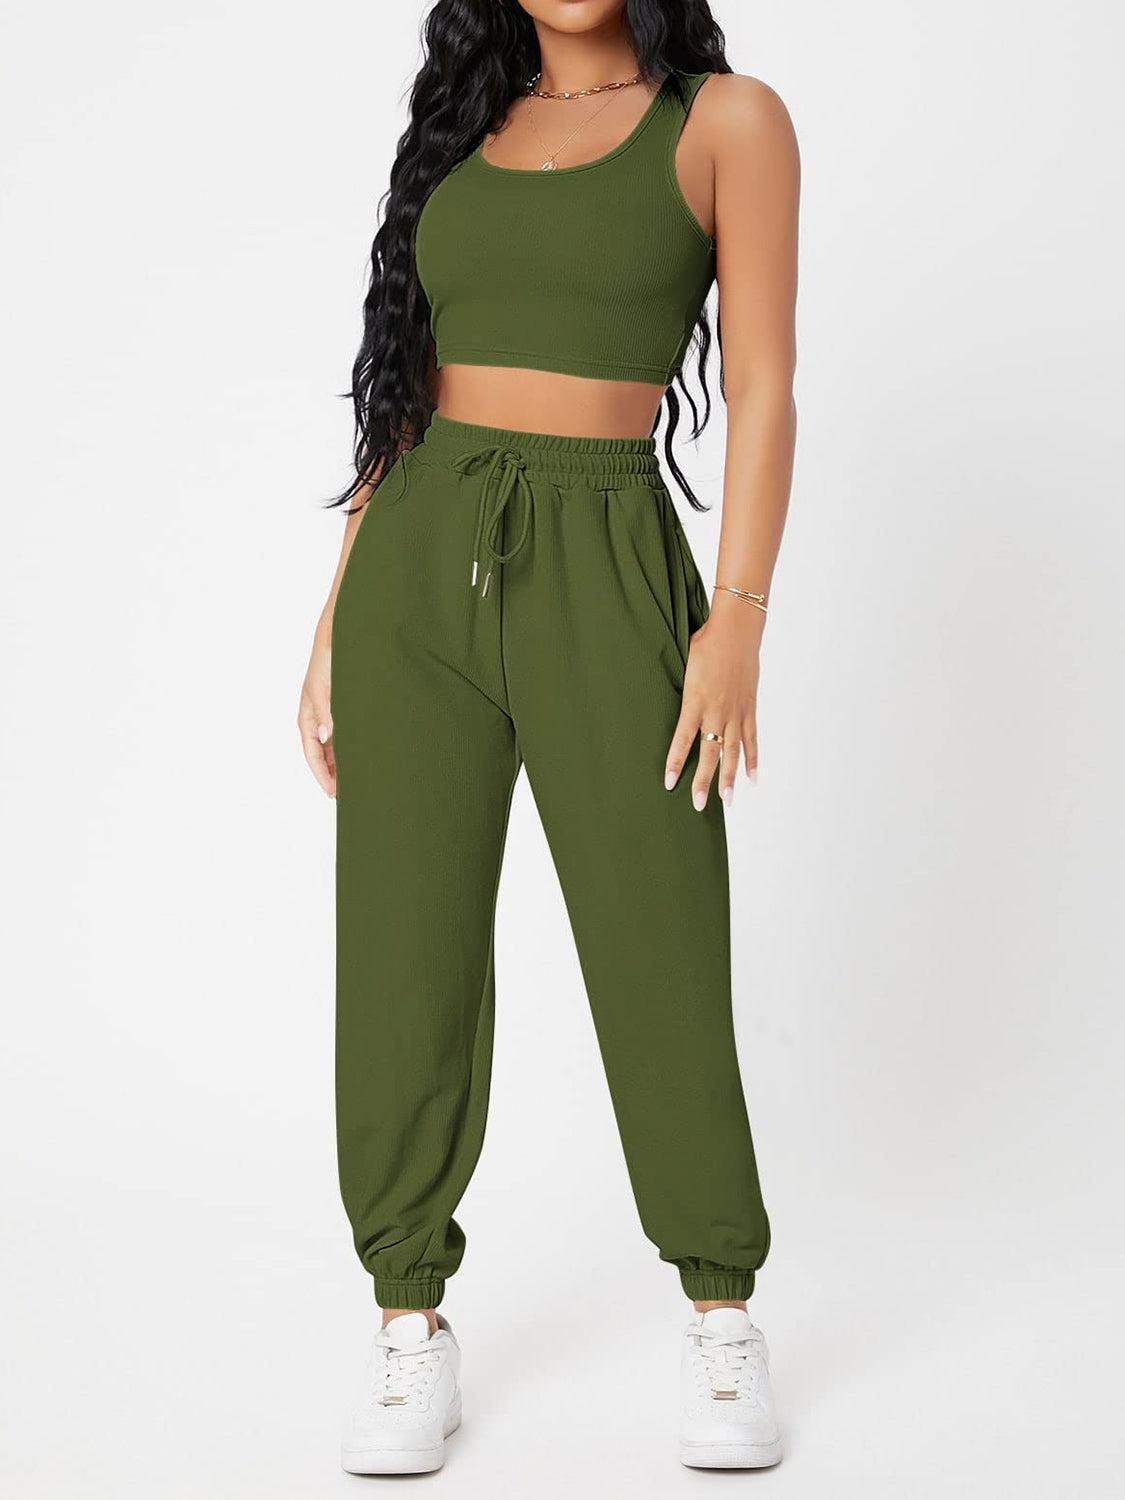 a woman in a crop top and sweat pants